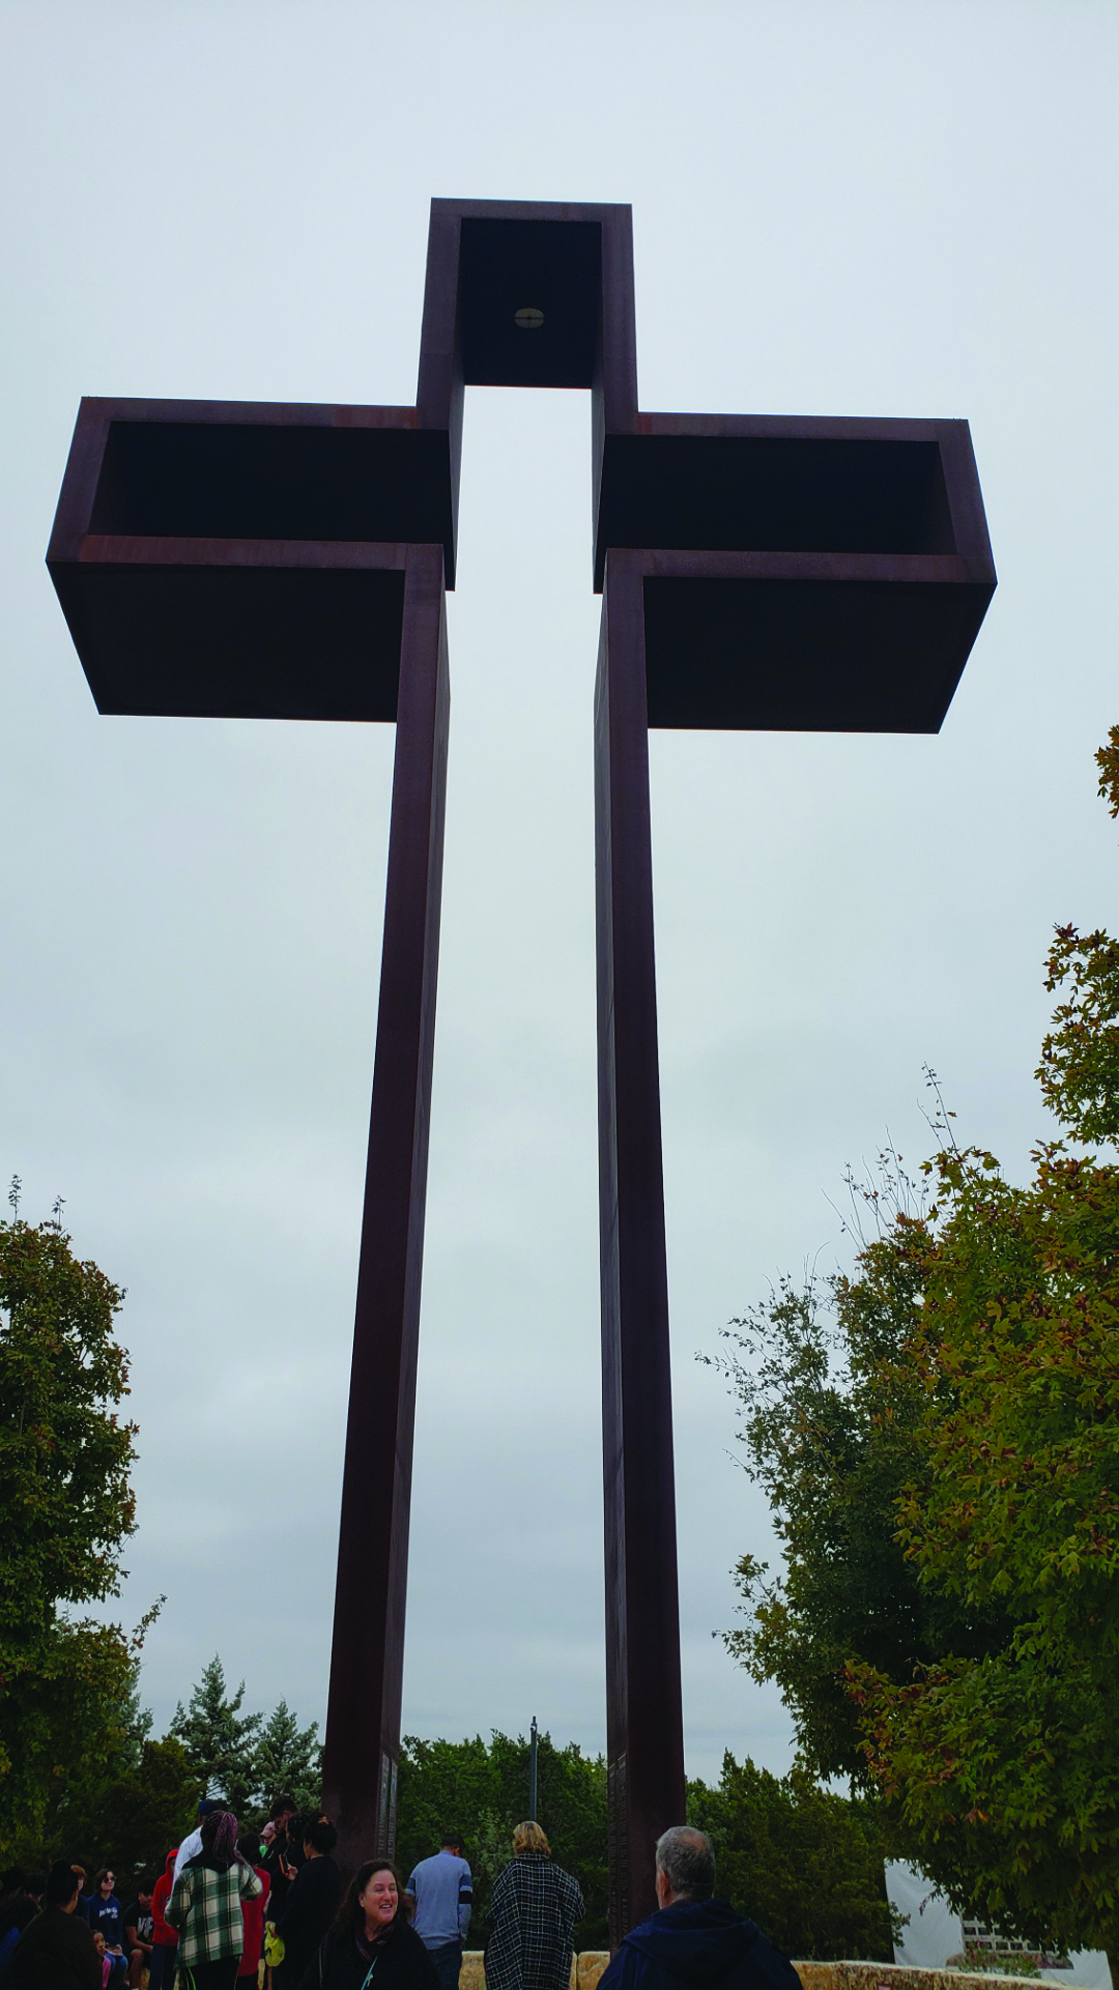 A special experience at the “Empty Cross” at Kerrville